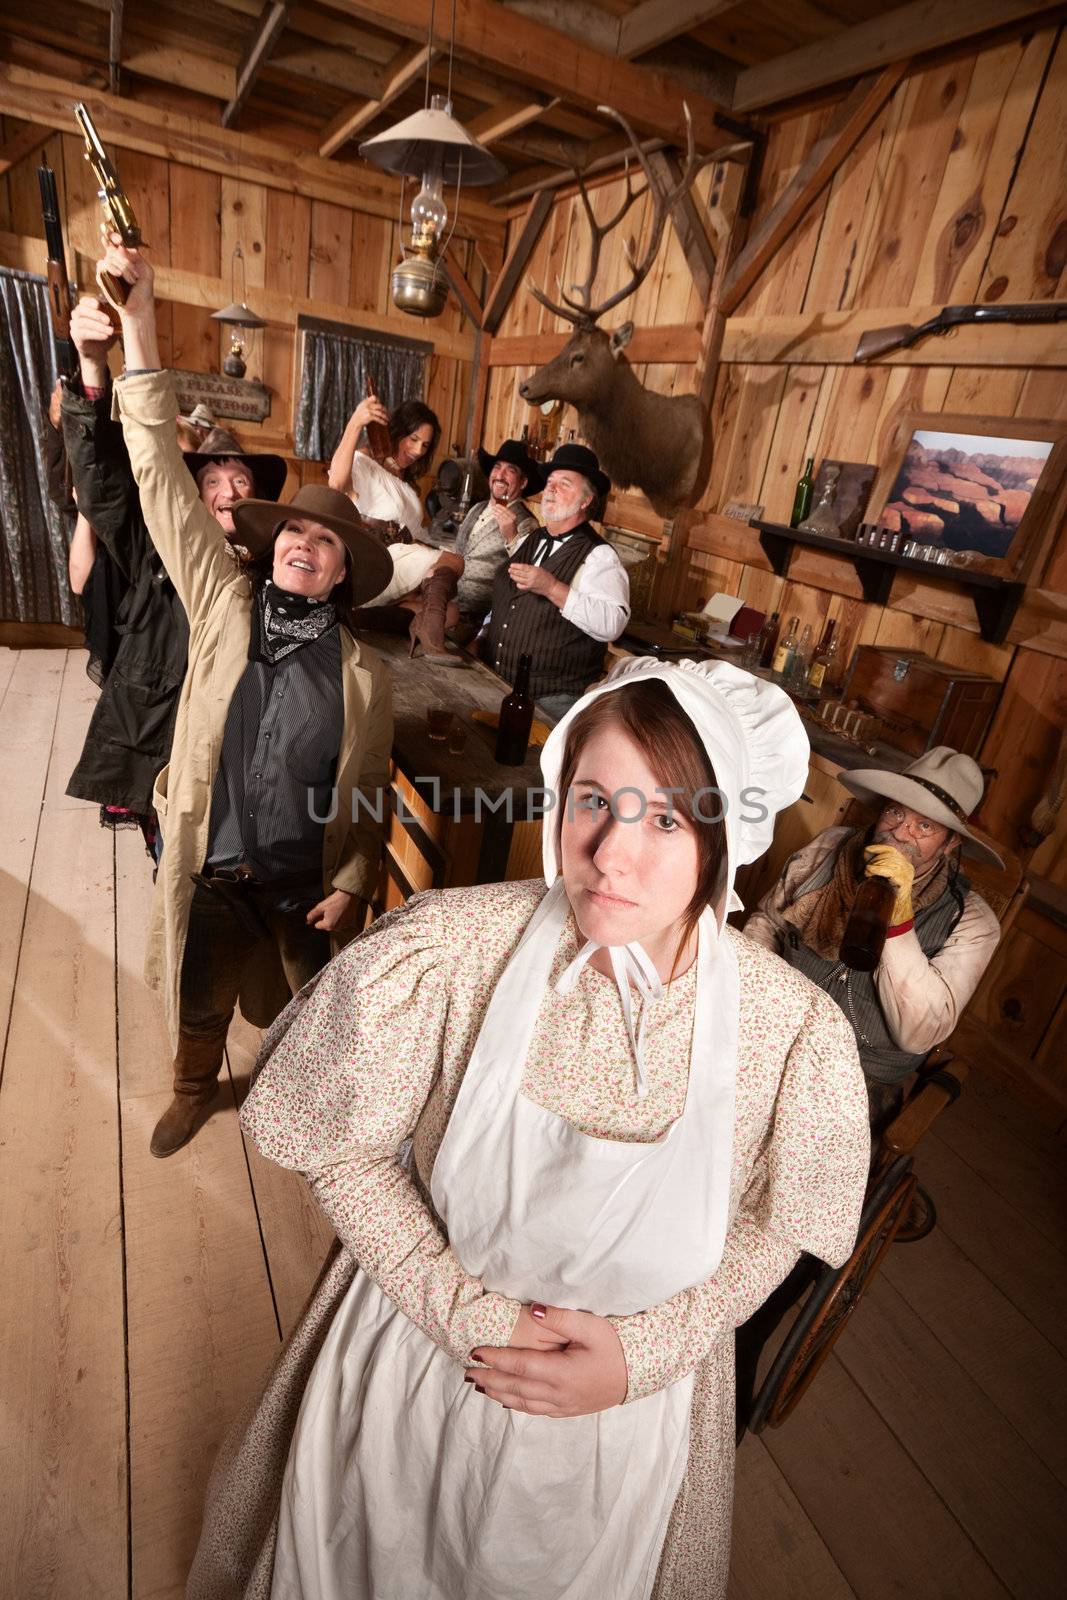 Modest young woman with group of drunks in saloon